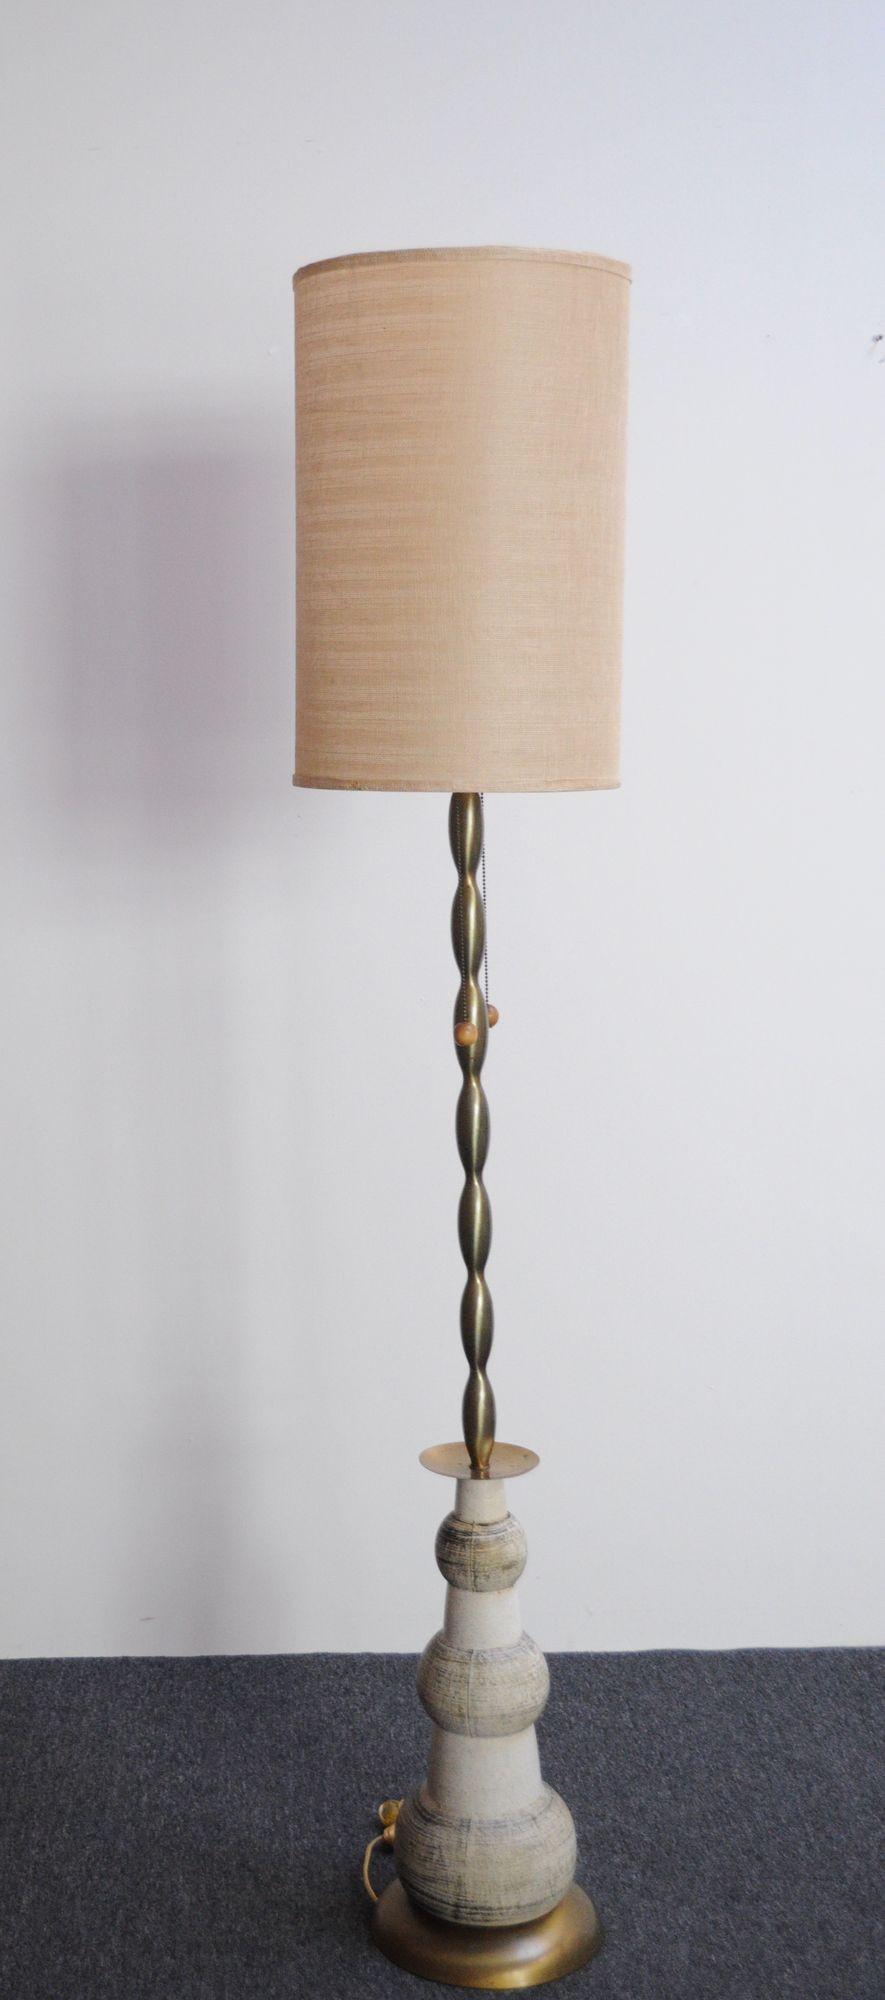 Glamorous and unique Hollywood Regency-Style floor lamp (ca. 1960s, USA).
Composed of a graduated ceramic orb base supporting a sculptural brass column stem with dual socket design, ring finial, and round pull string adornments.
Very good, vintage